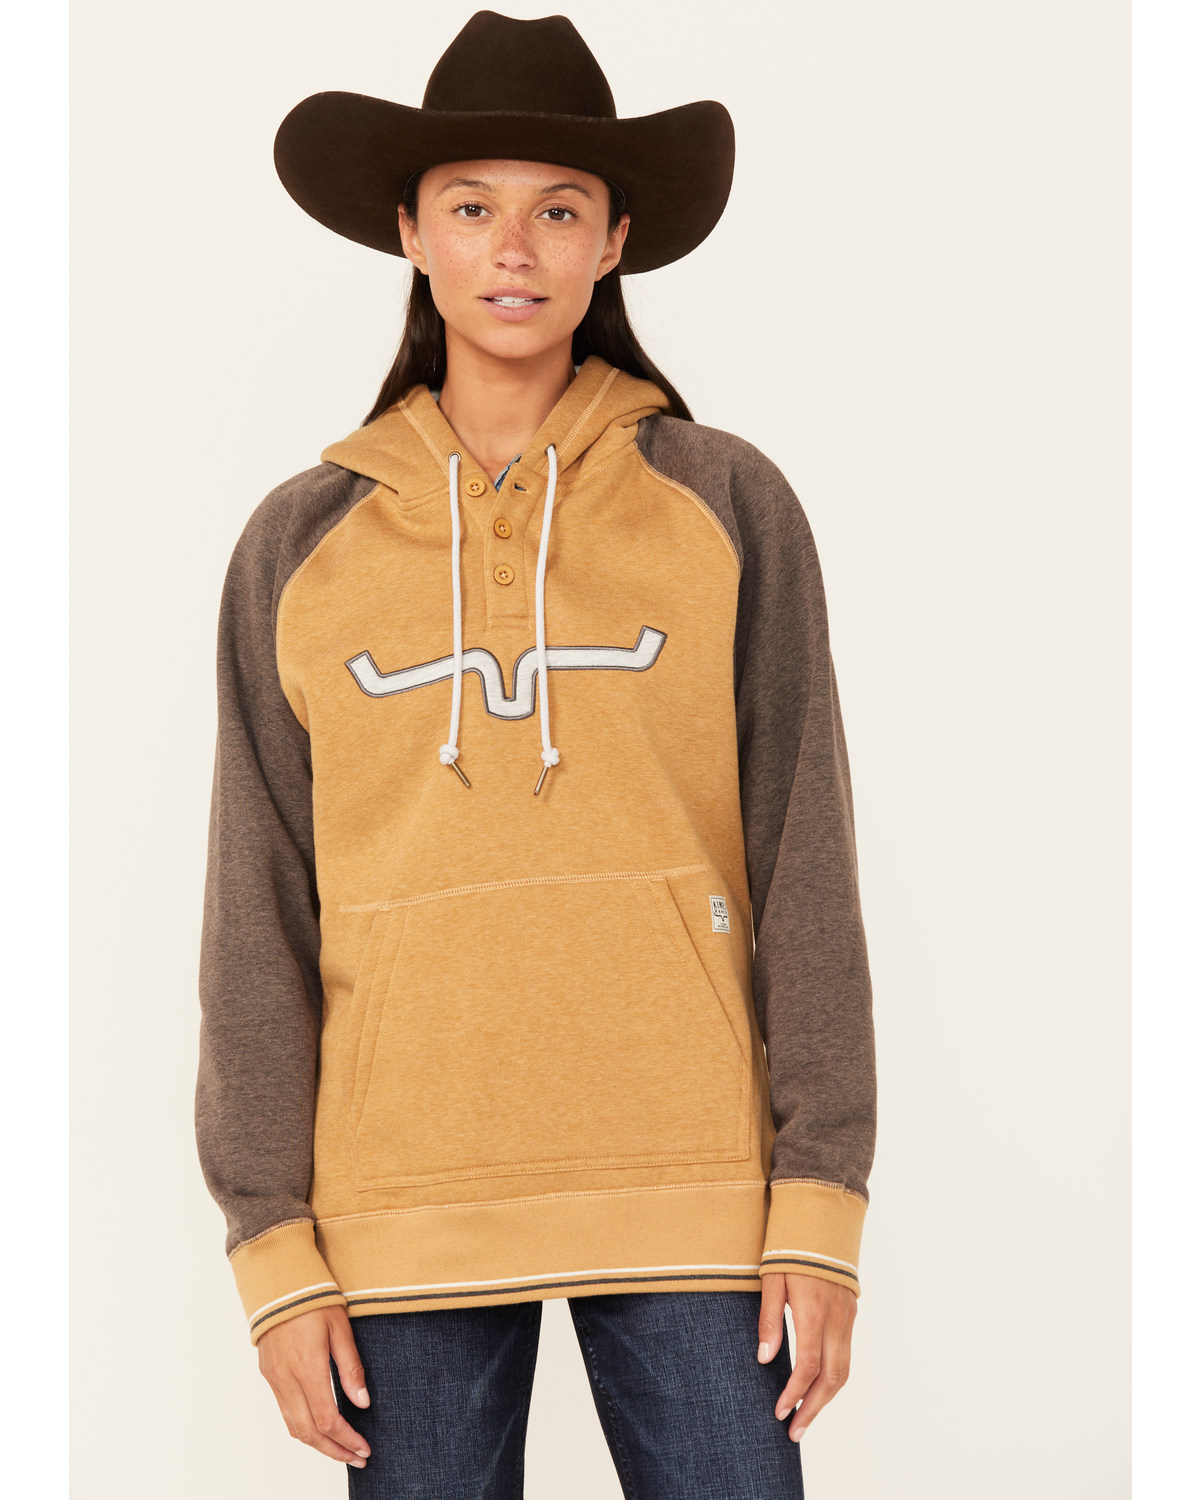 Kimes Ranch Women's Embroidered Amigo Hooded Pullover